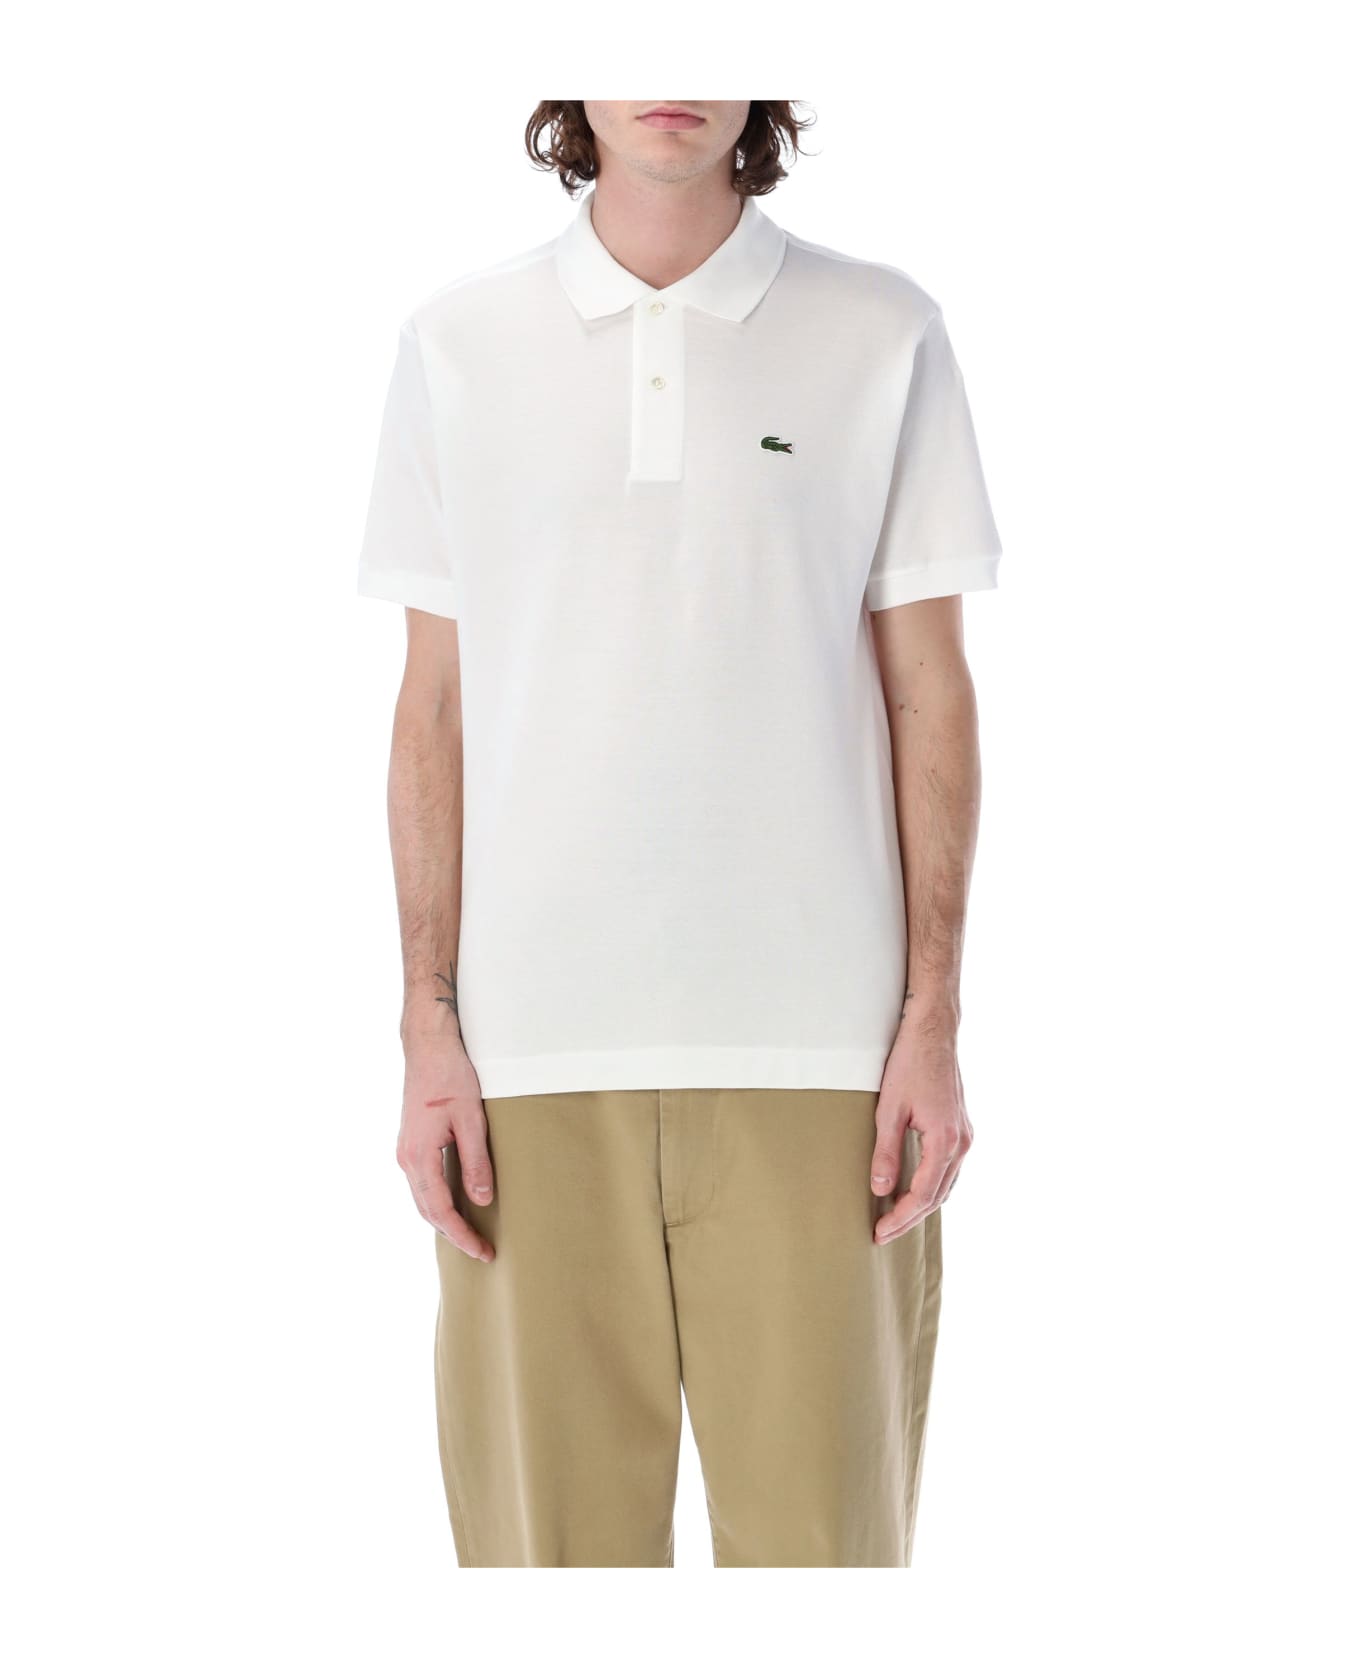 Lacoste Classic Fit Polo Shirt - WHITE